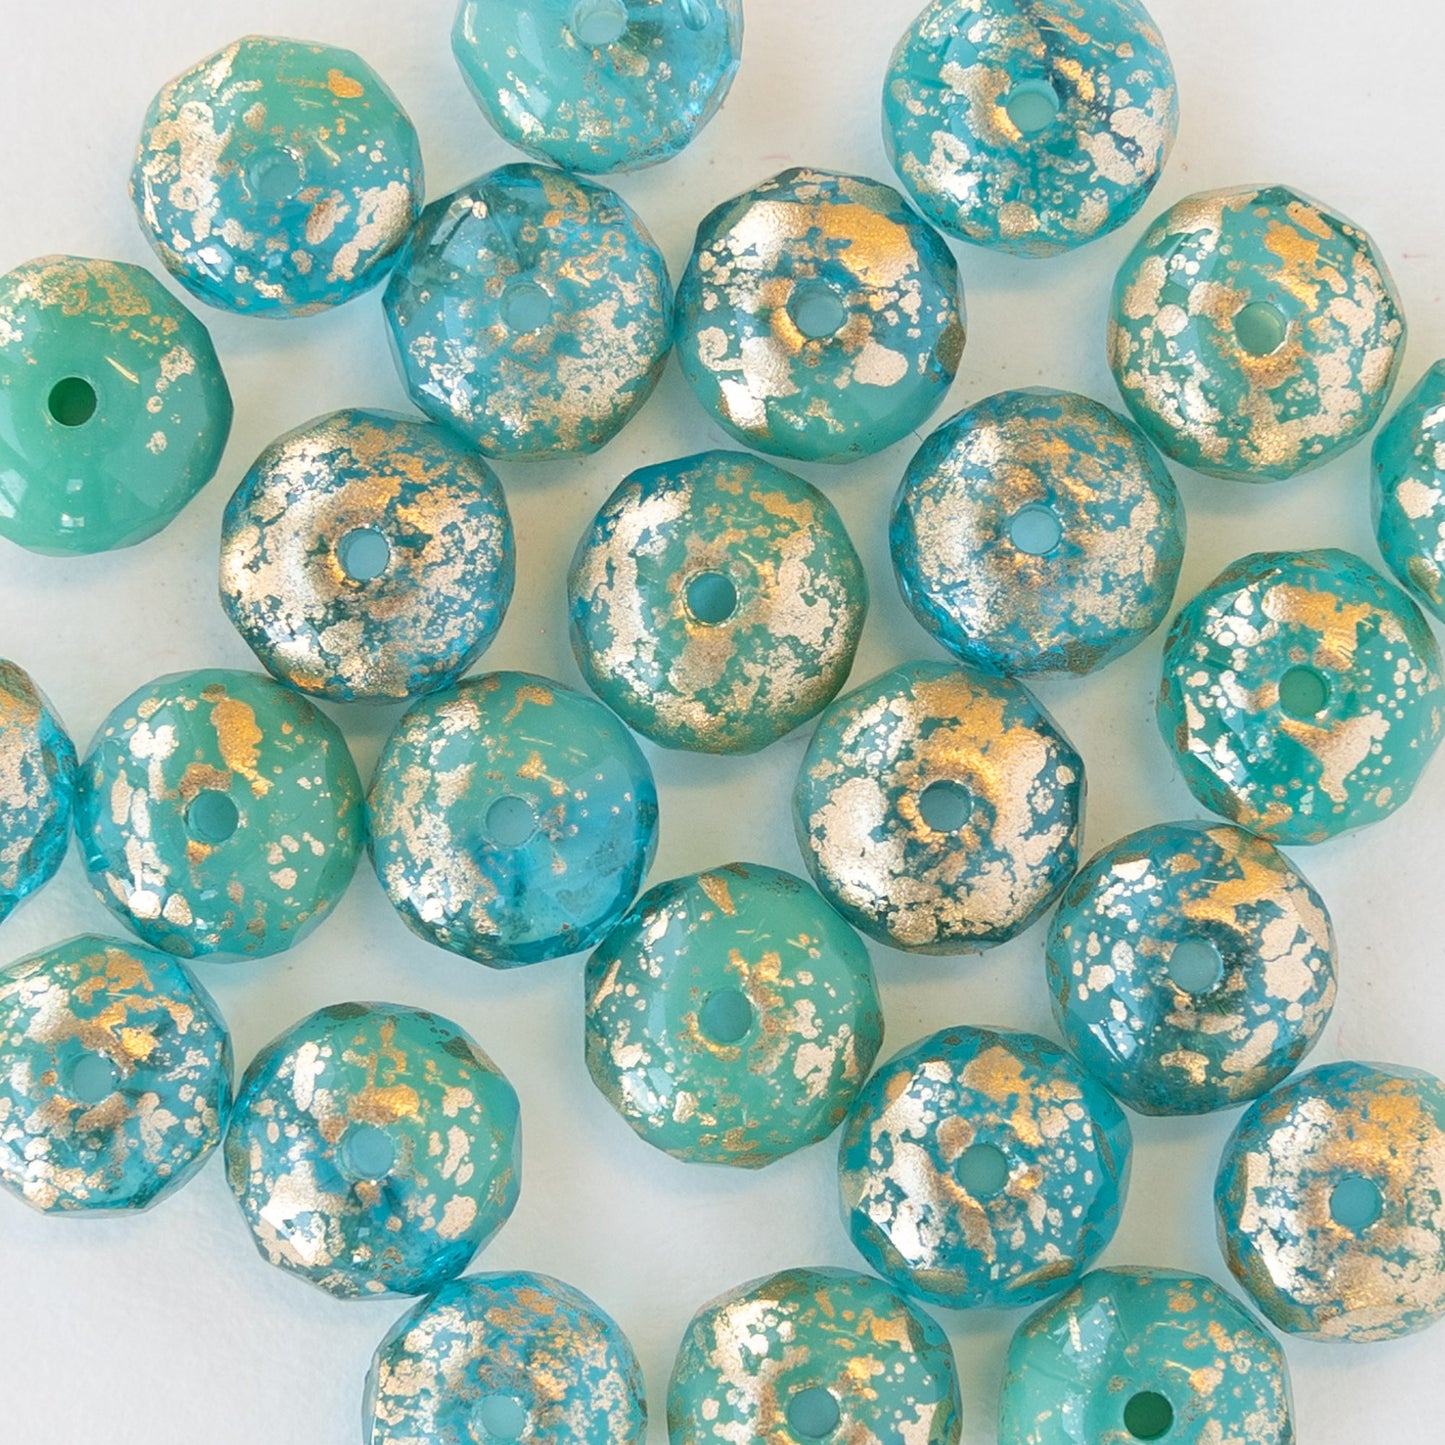 Load image into Gallery viewer, 5x7mm Rondelle Beads - Aqua and Turquoise with Gold Dust - 25 Beads
